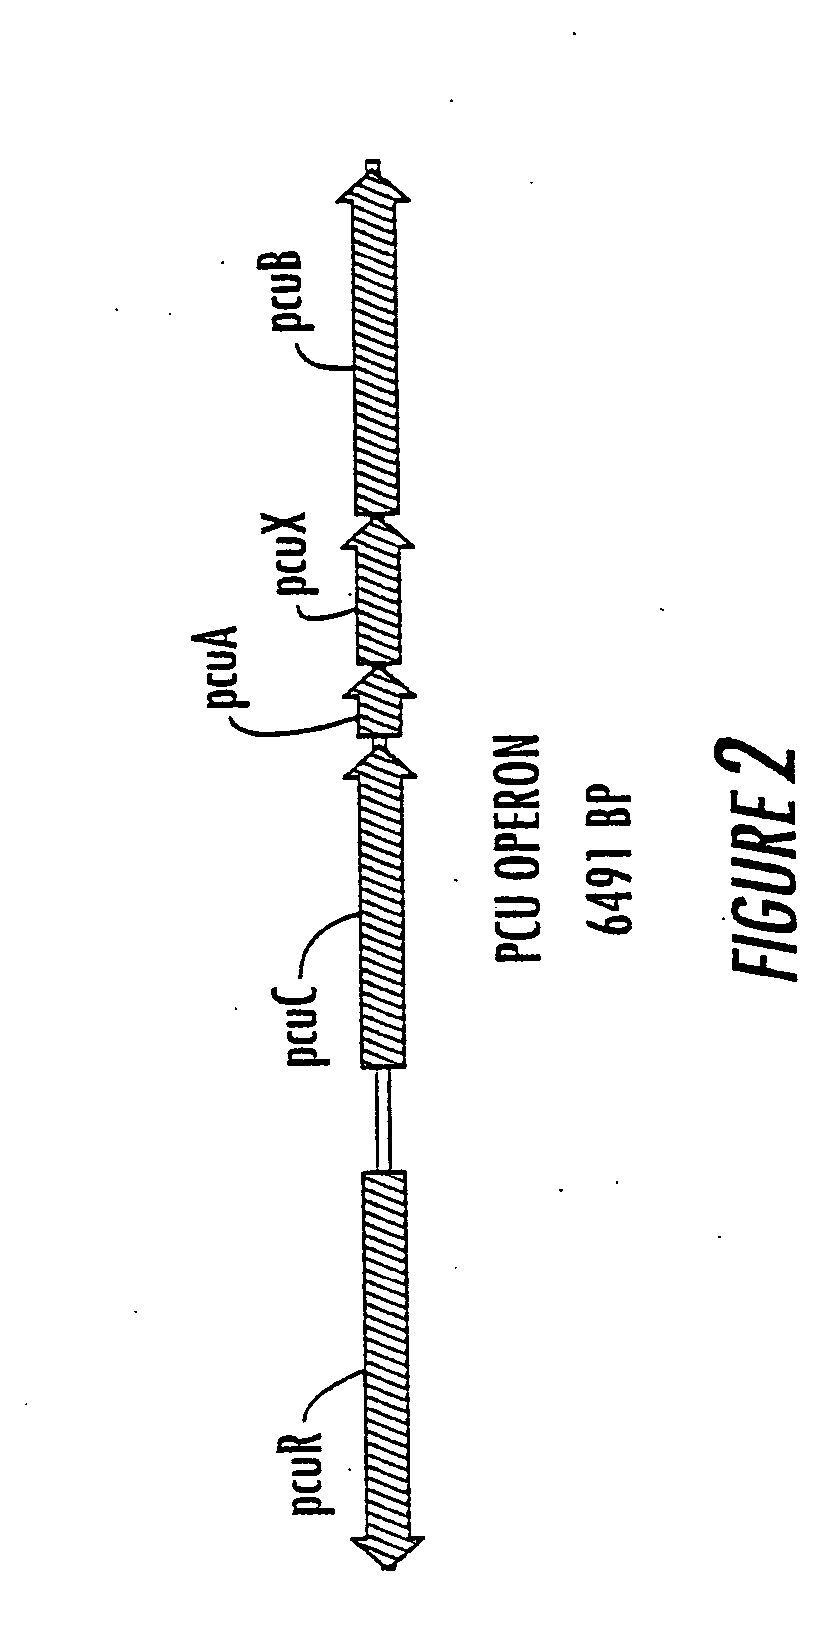 Method for the production of p-hydroxybenzoate in species of Pseudomonas and agrobacterium